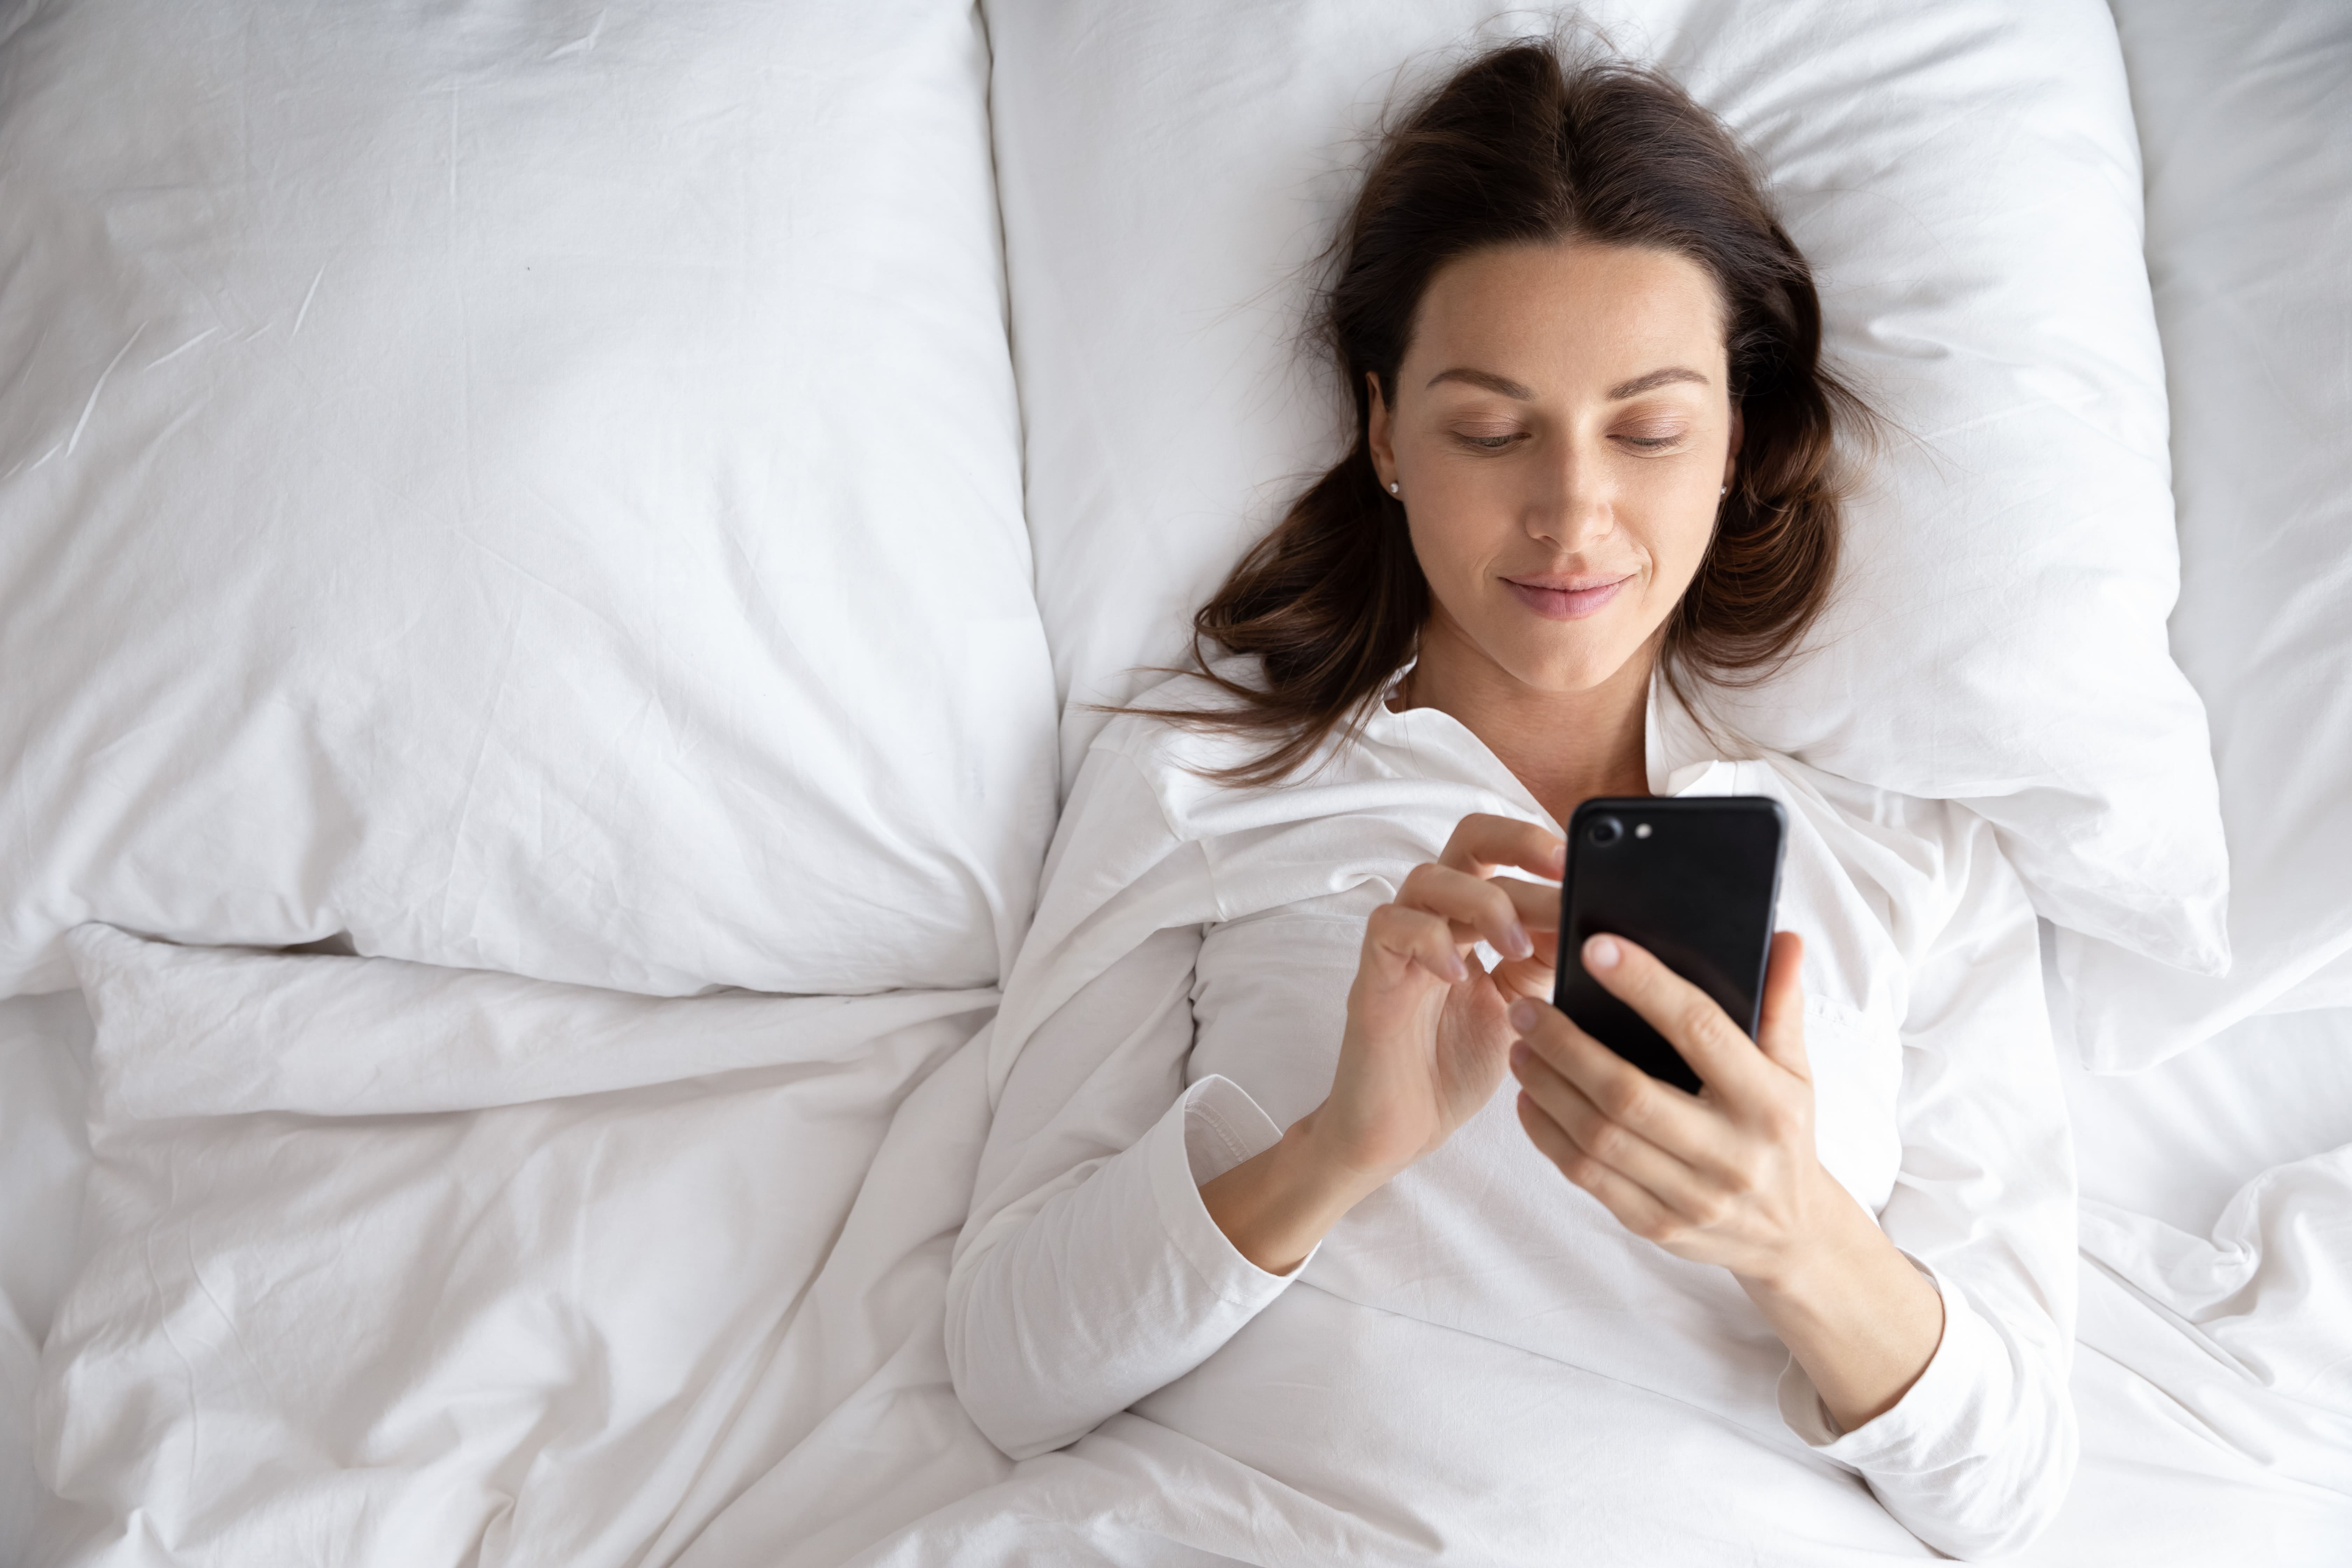 Bird's eye view of woman lying bed scrolling on her mobile 'phone.